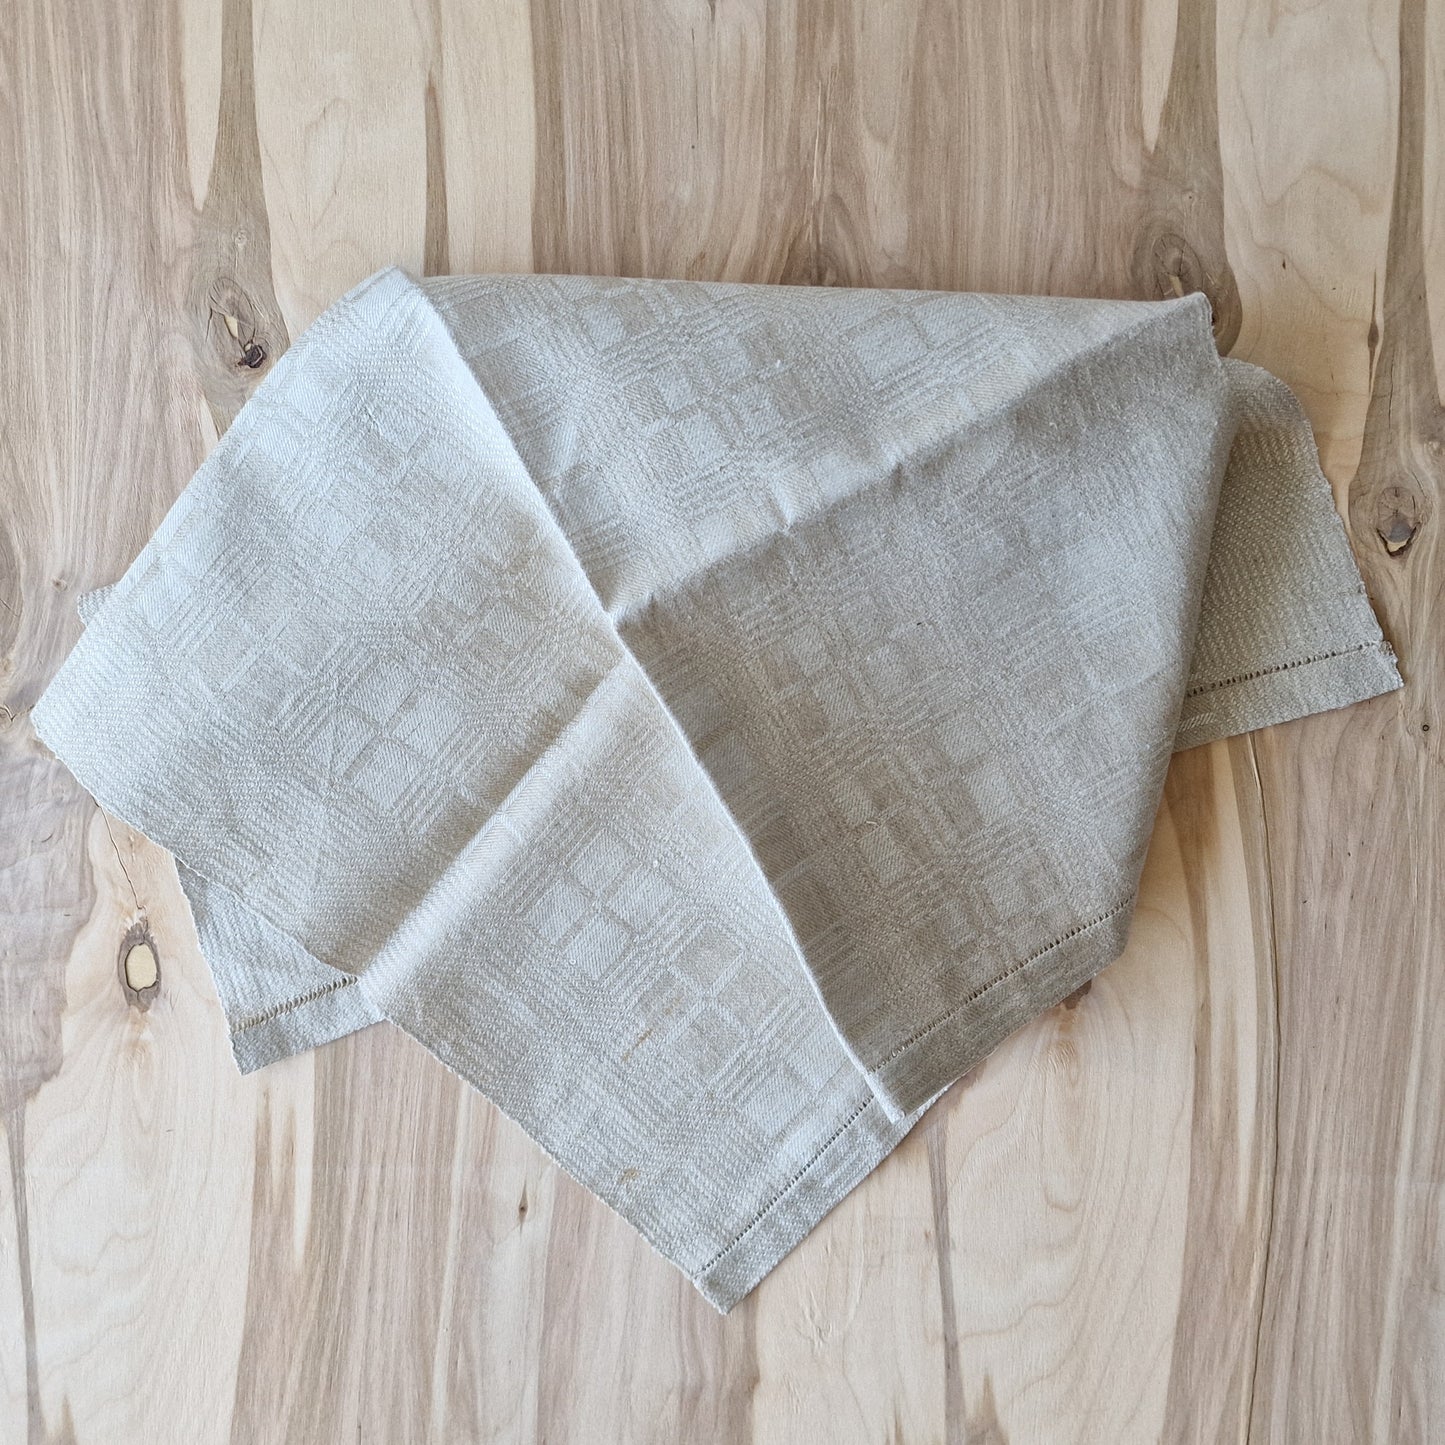 Gray long linen table runner/towel with small square patterns 46x74 cm. (DZPE 30)